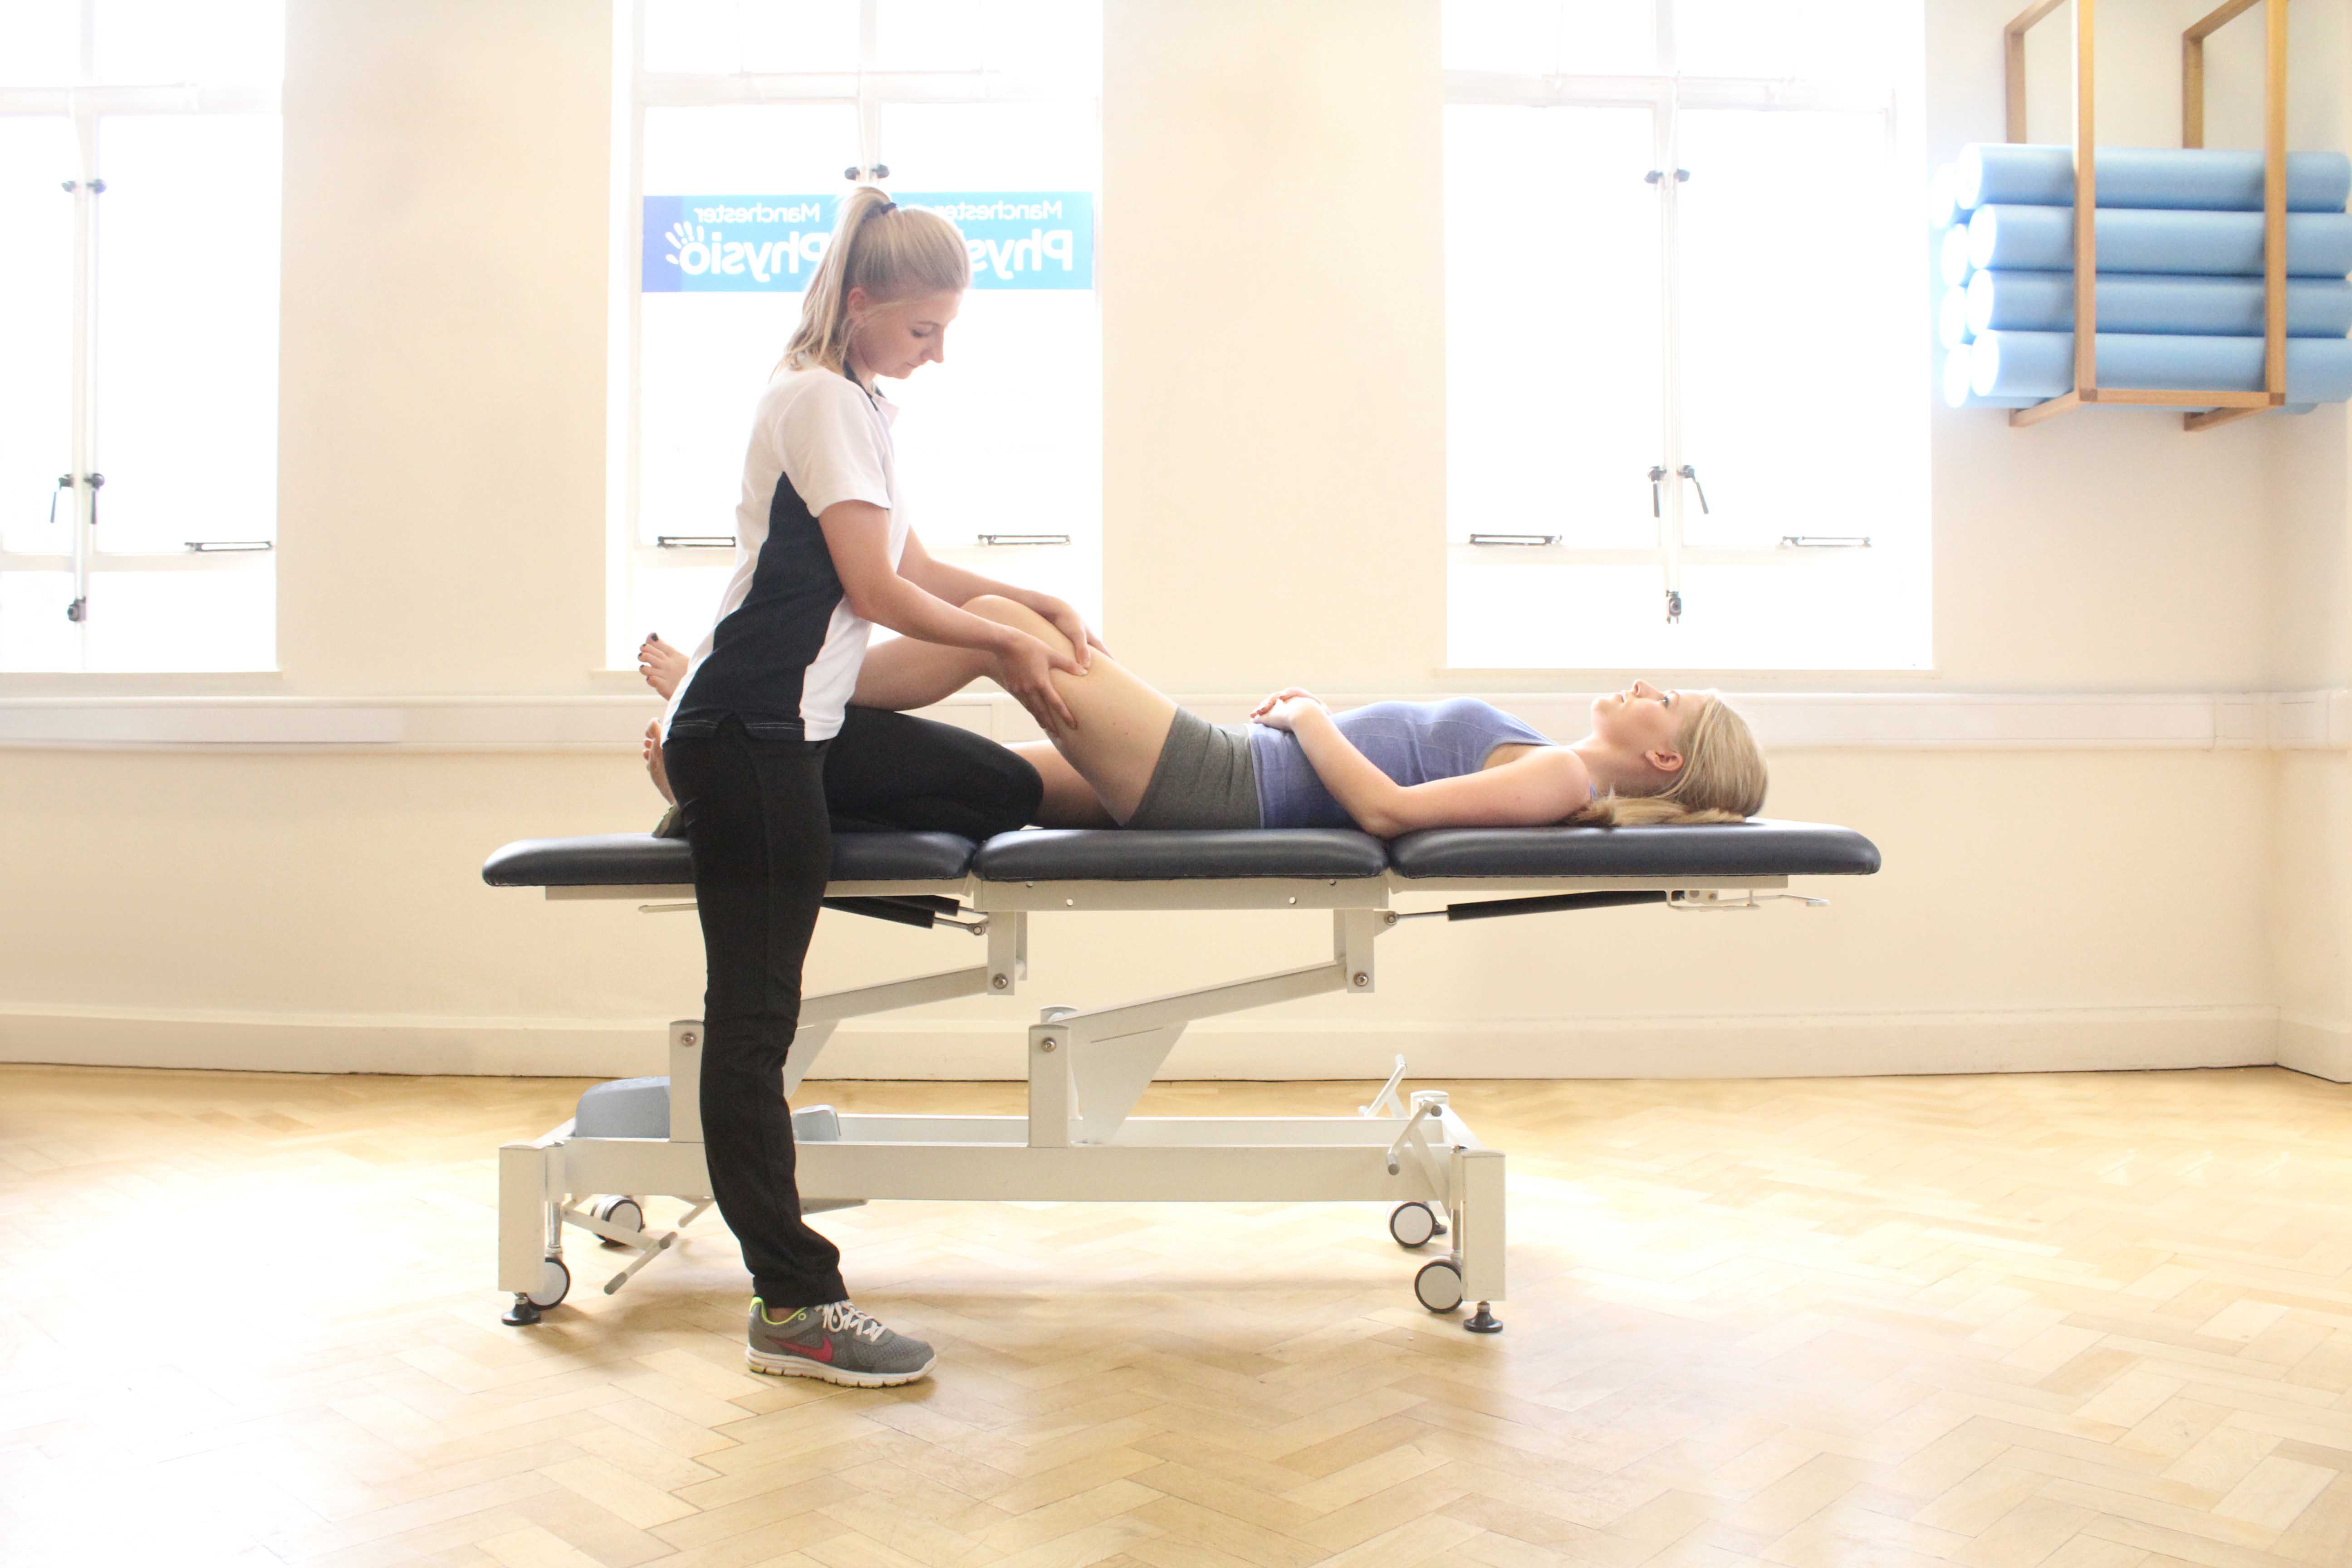 Trigger point massage of the quadriceps muscles by experienced MSK therapist